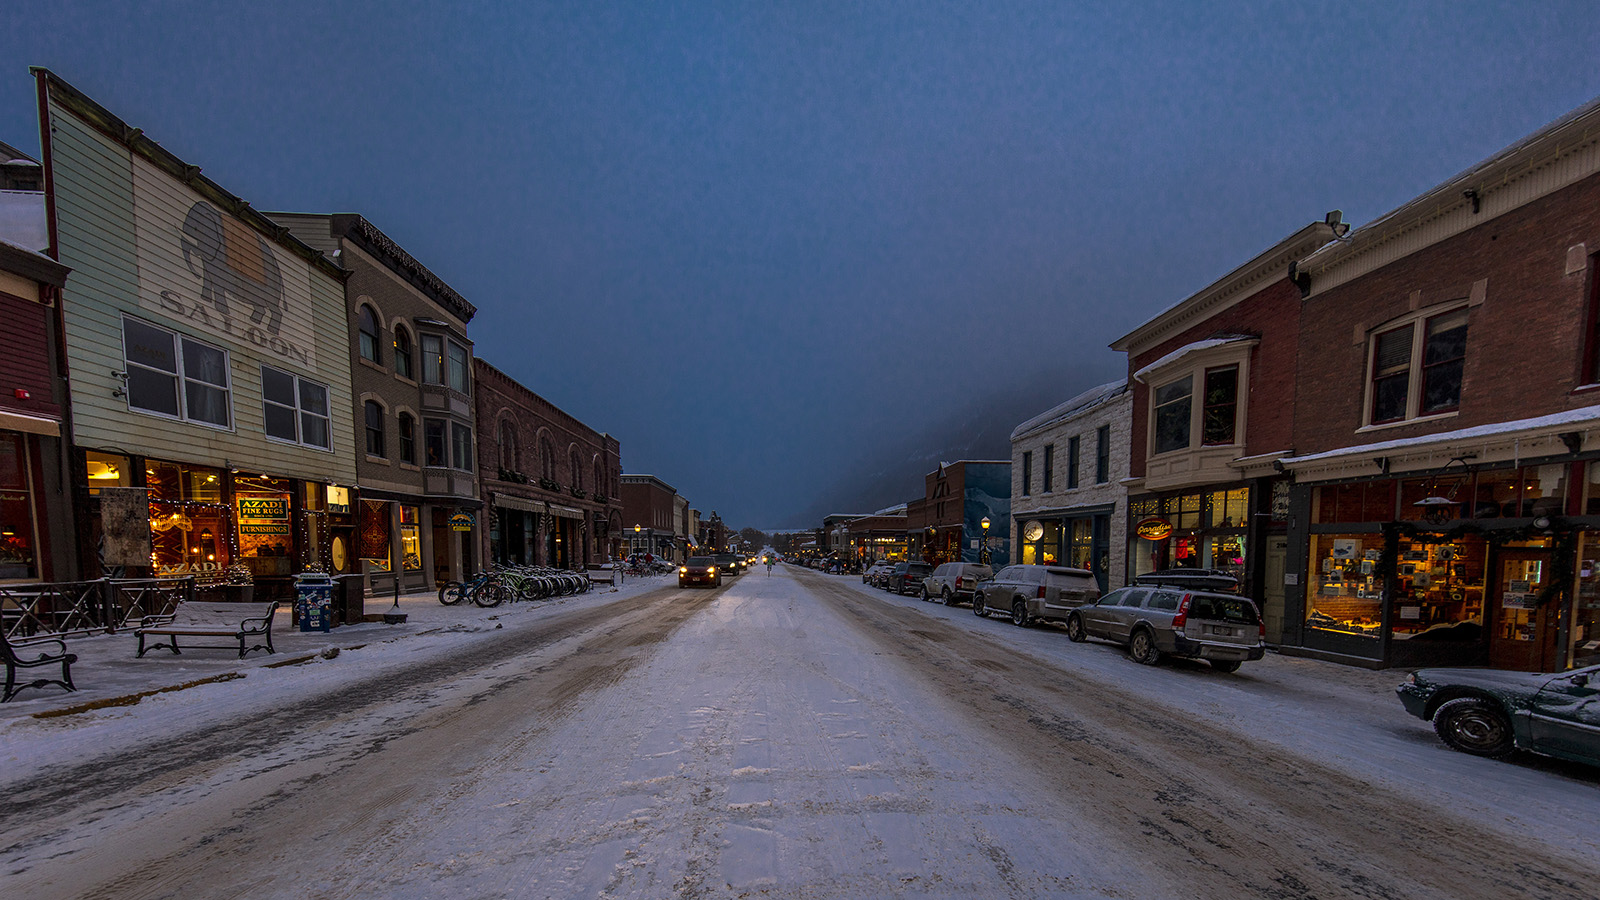 Downtown Telluride Colorado in a snow storm